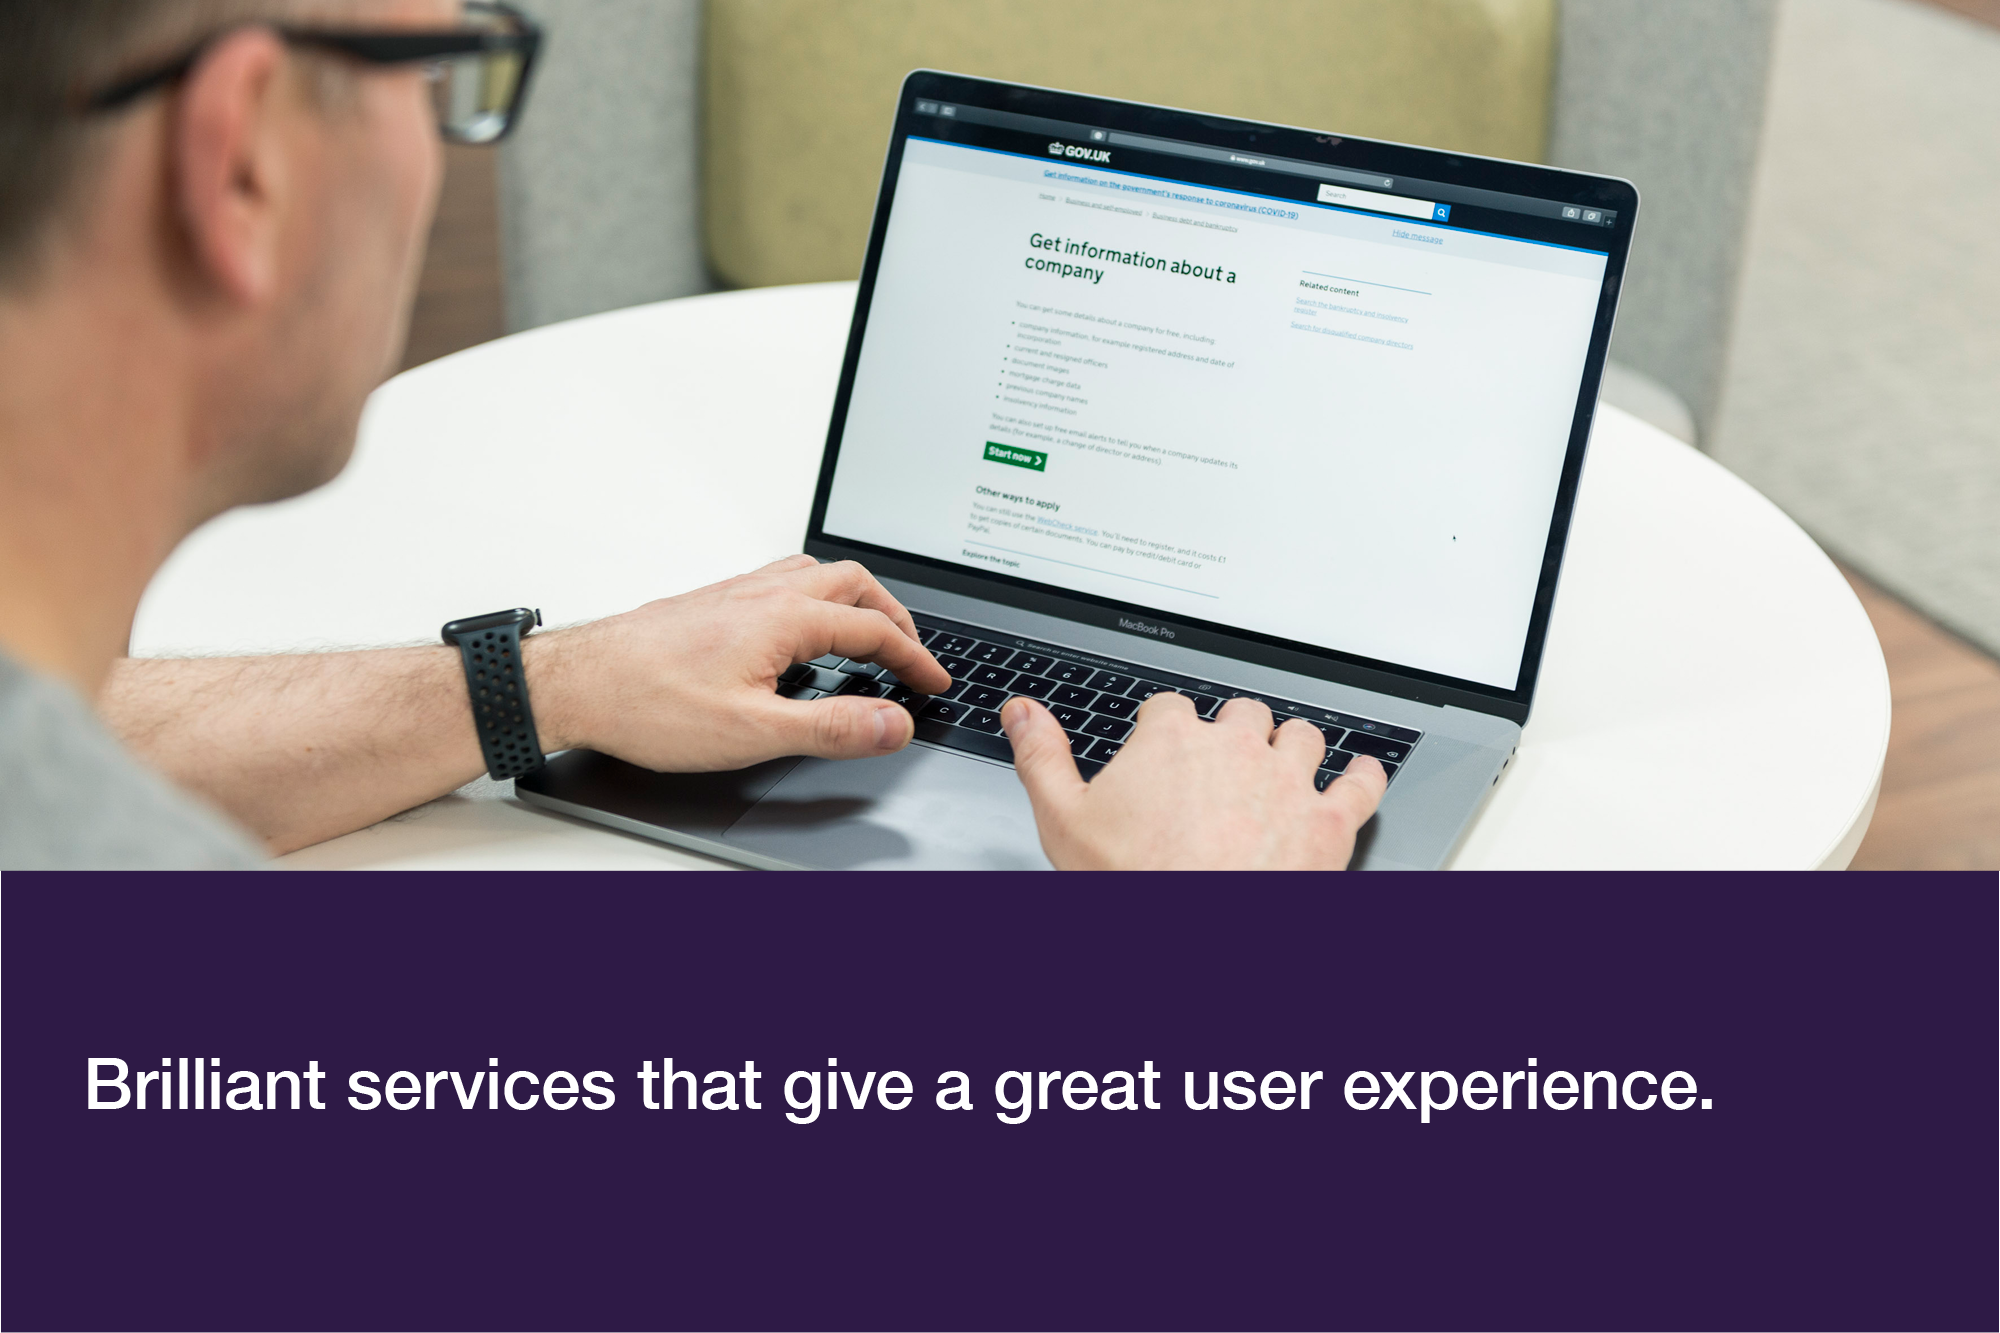 Brilliant services that give a great user experience.